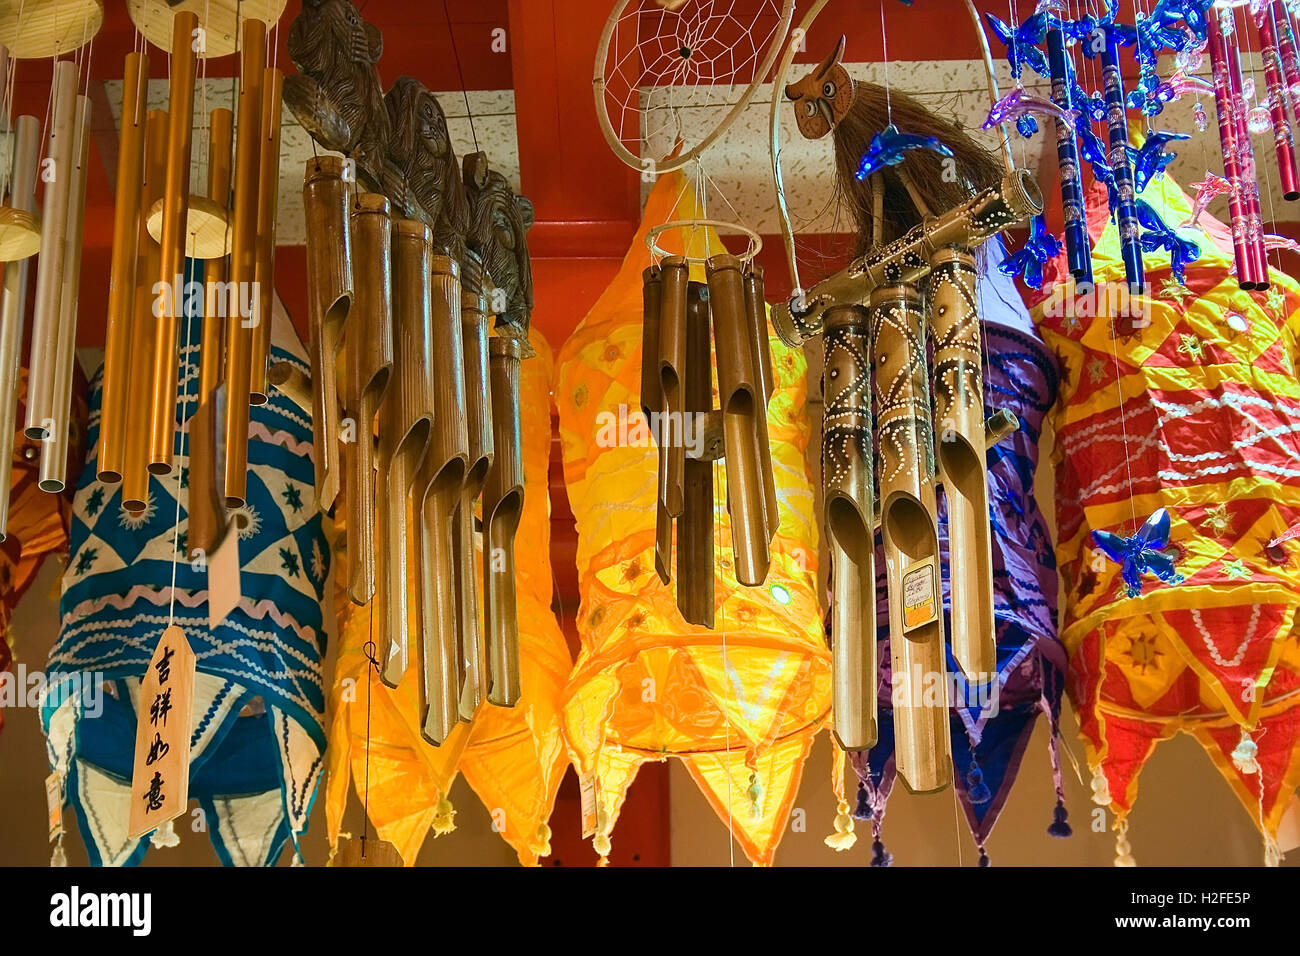 Wind chimes and fairy lights in a souvenir shop for sale. Landscape orientation. Stock Photo